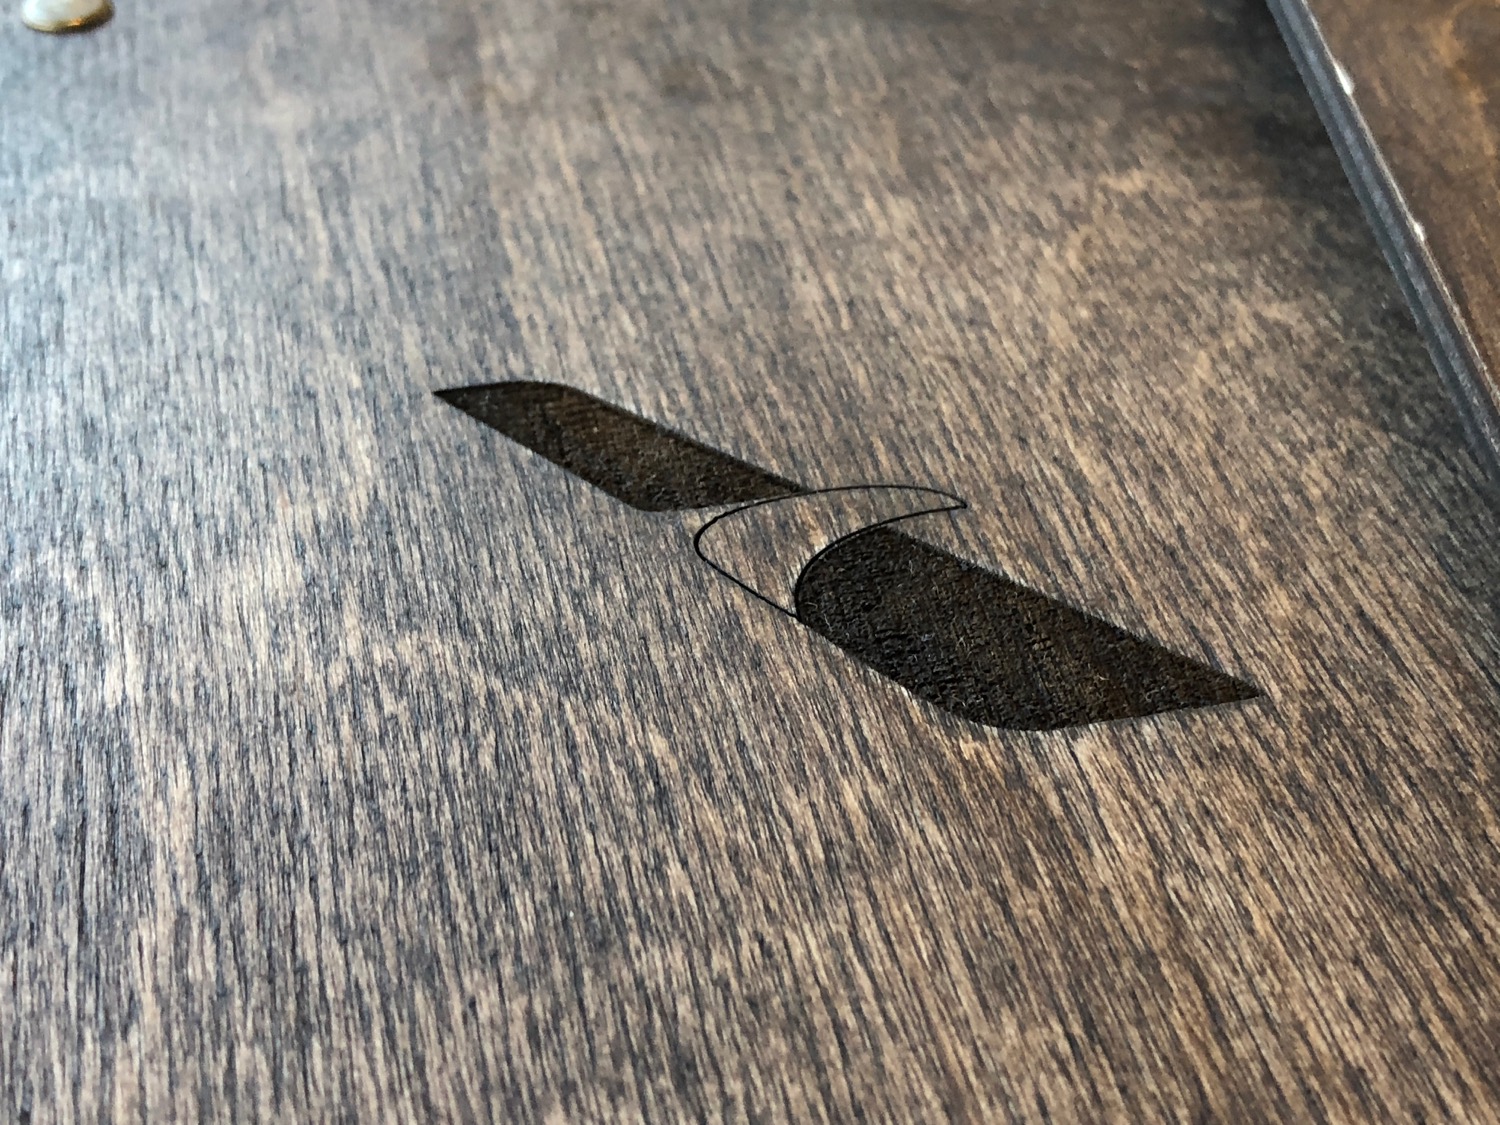 a logo on a wood surface